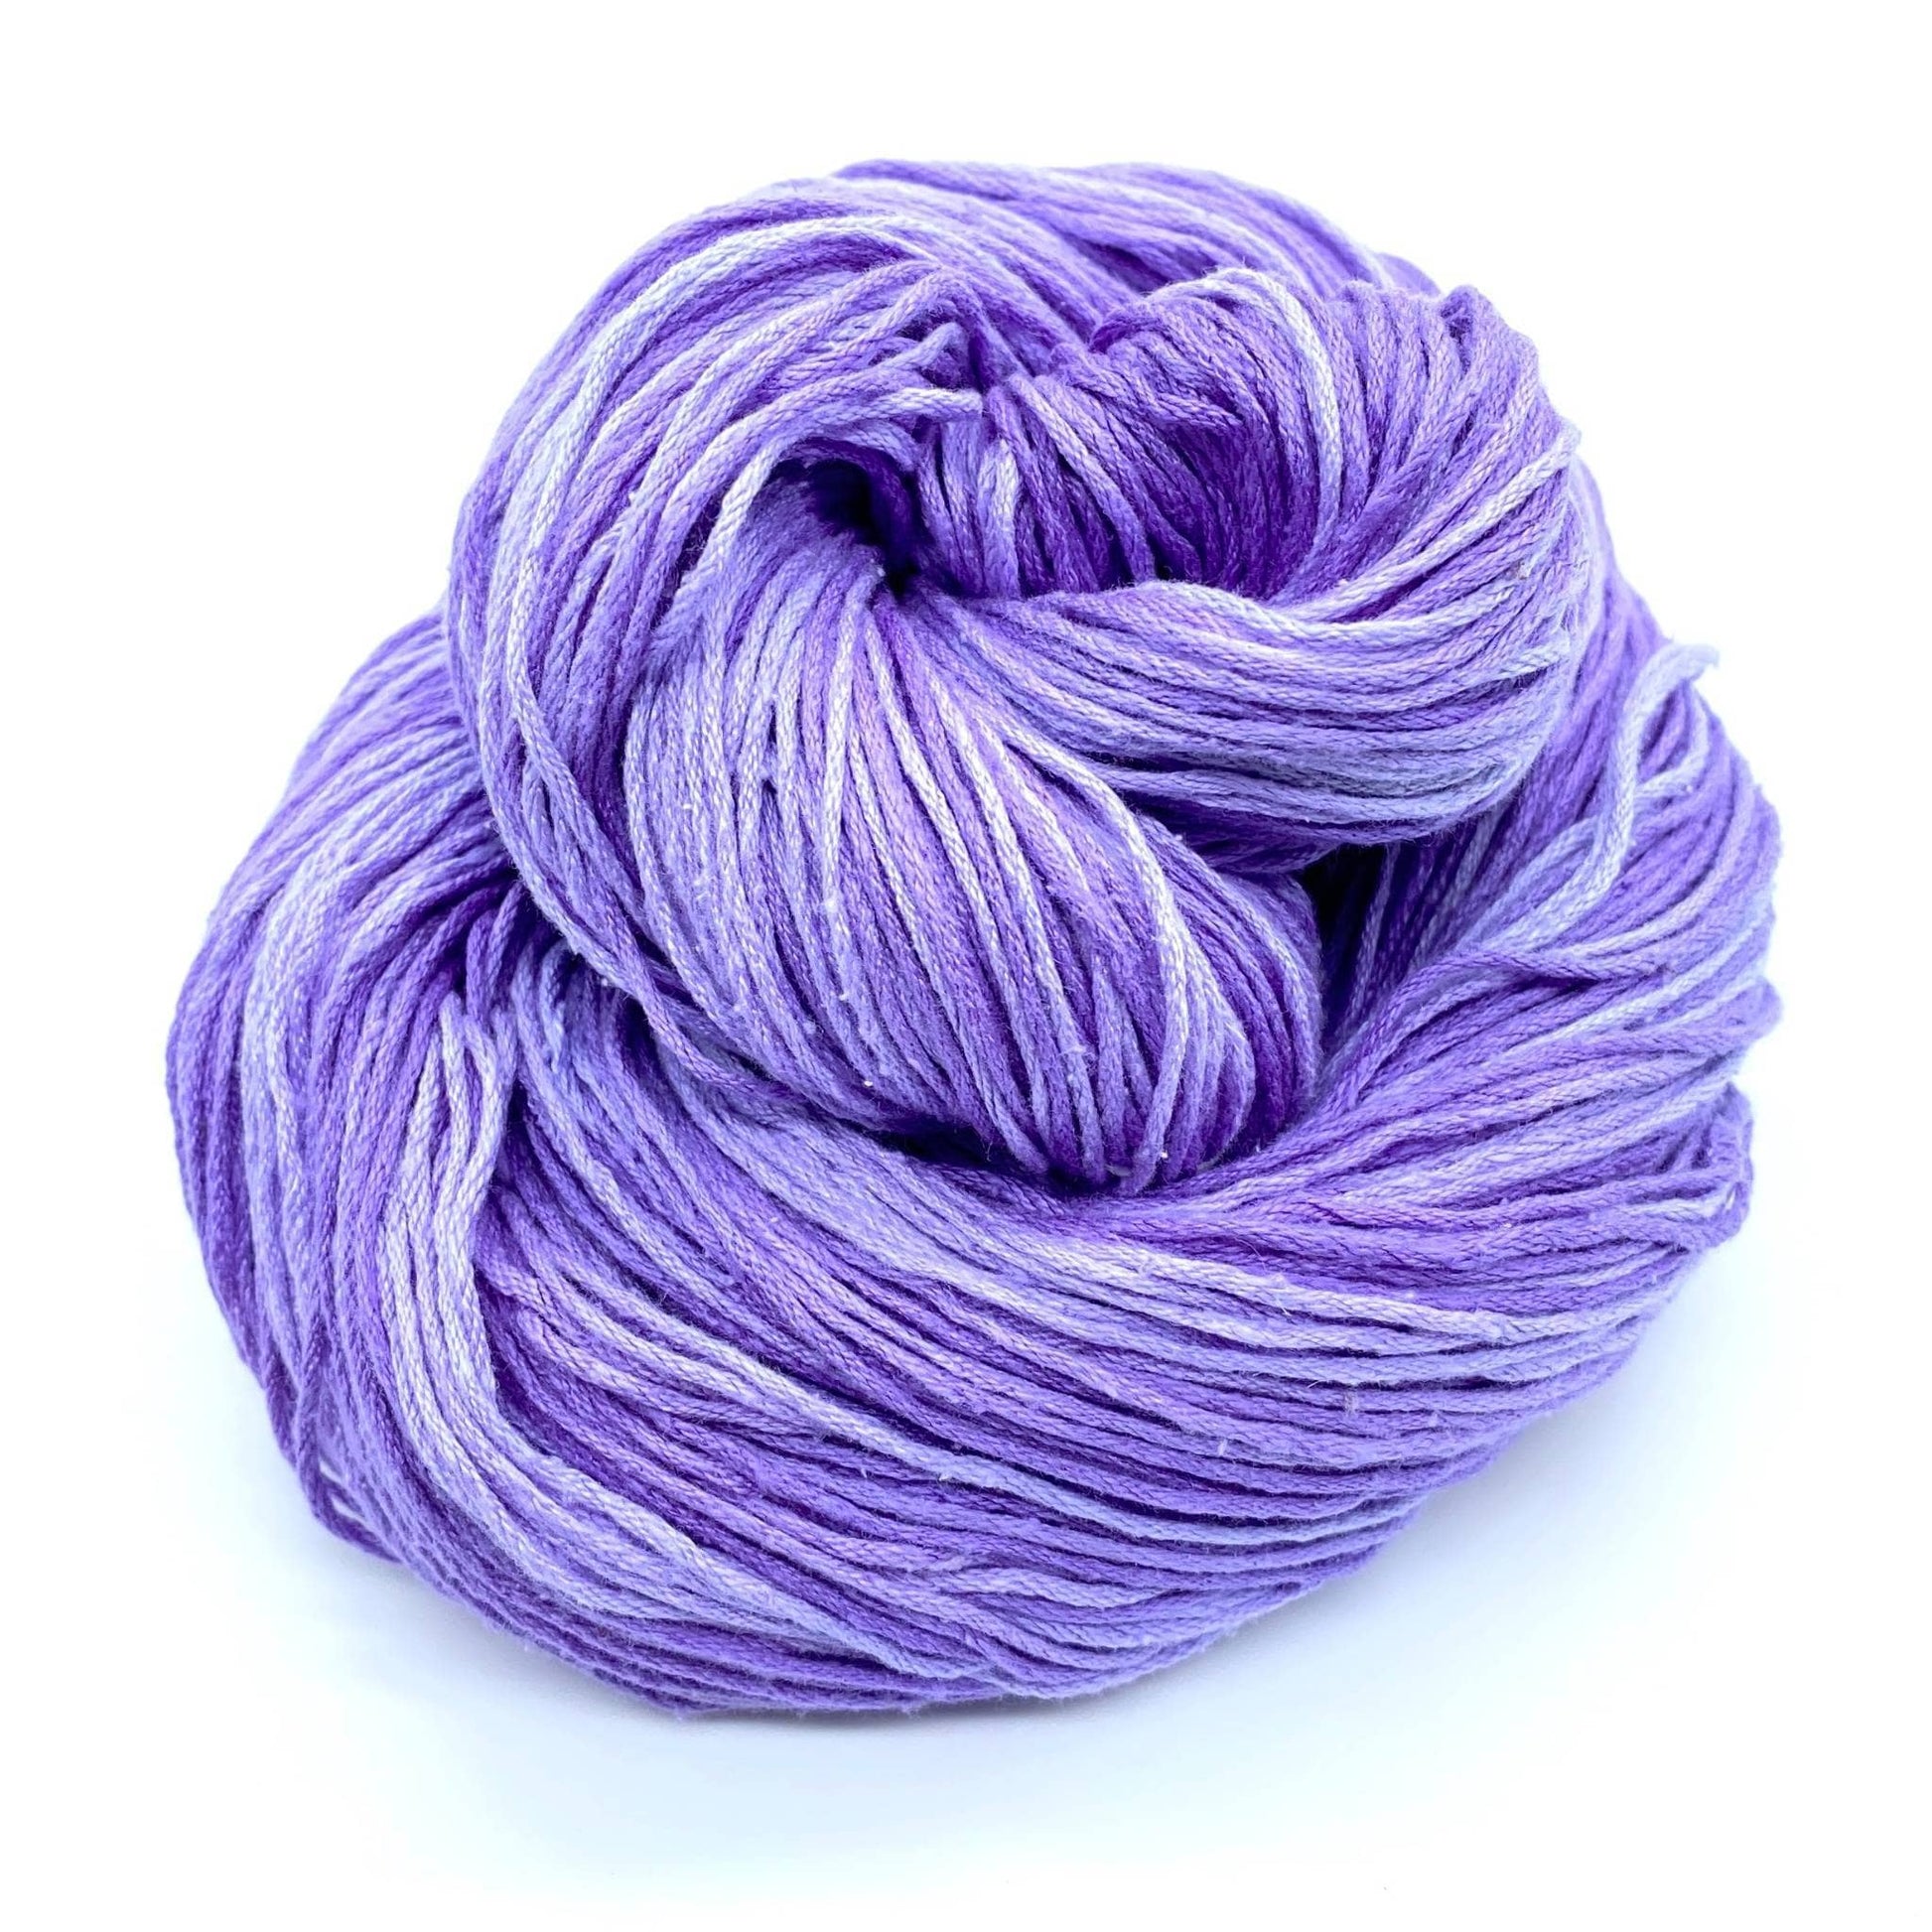 birds nested hank of mulberry silk fingering weight yarn in the colorway lavender fields (light and medium lilac variegated) in front of a white background.